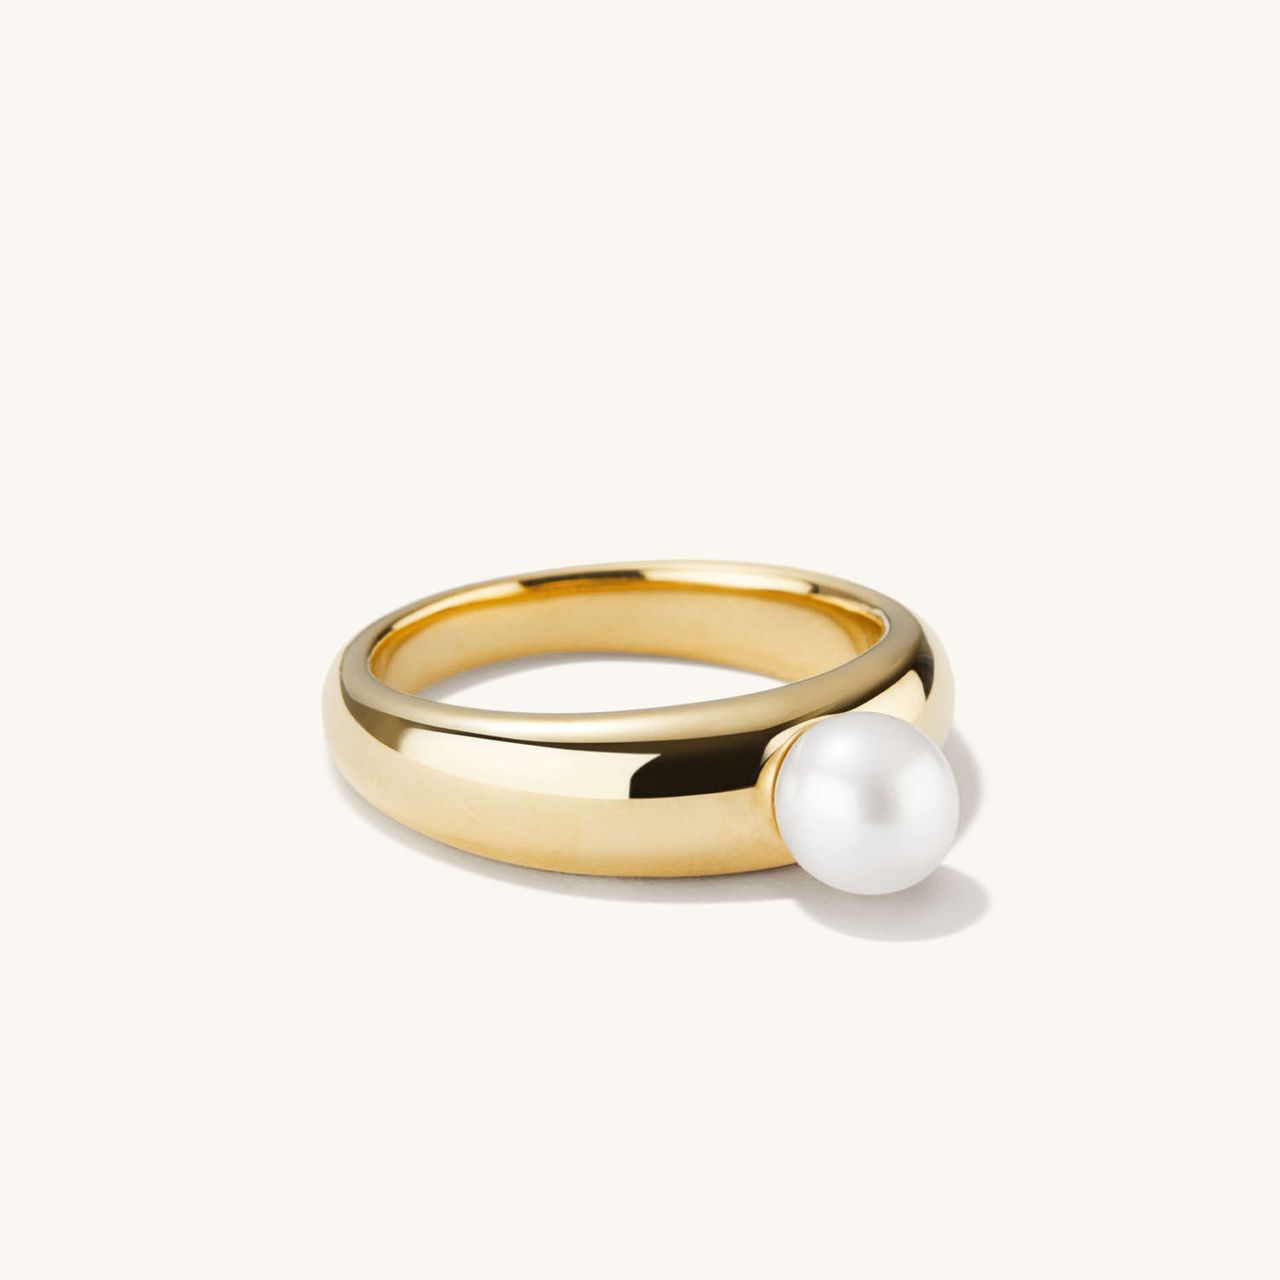 Shop 12 of the Best Rings Under $100 from Mejuri | Who What Wear